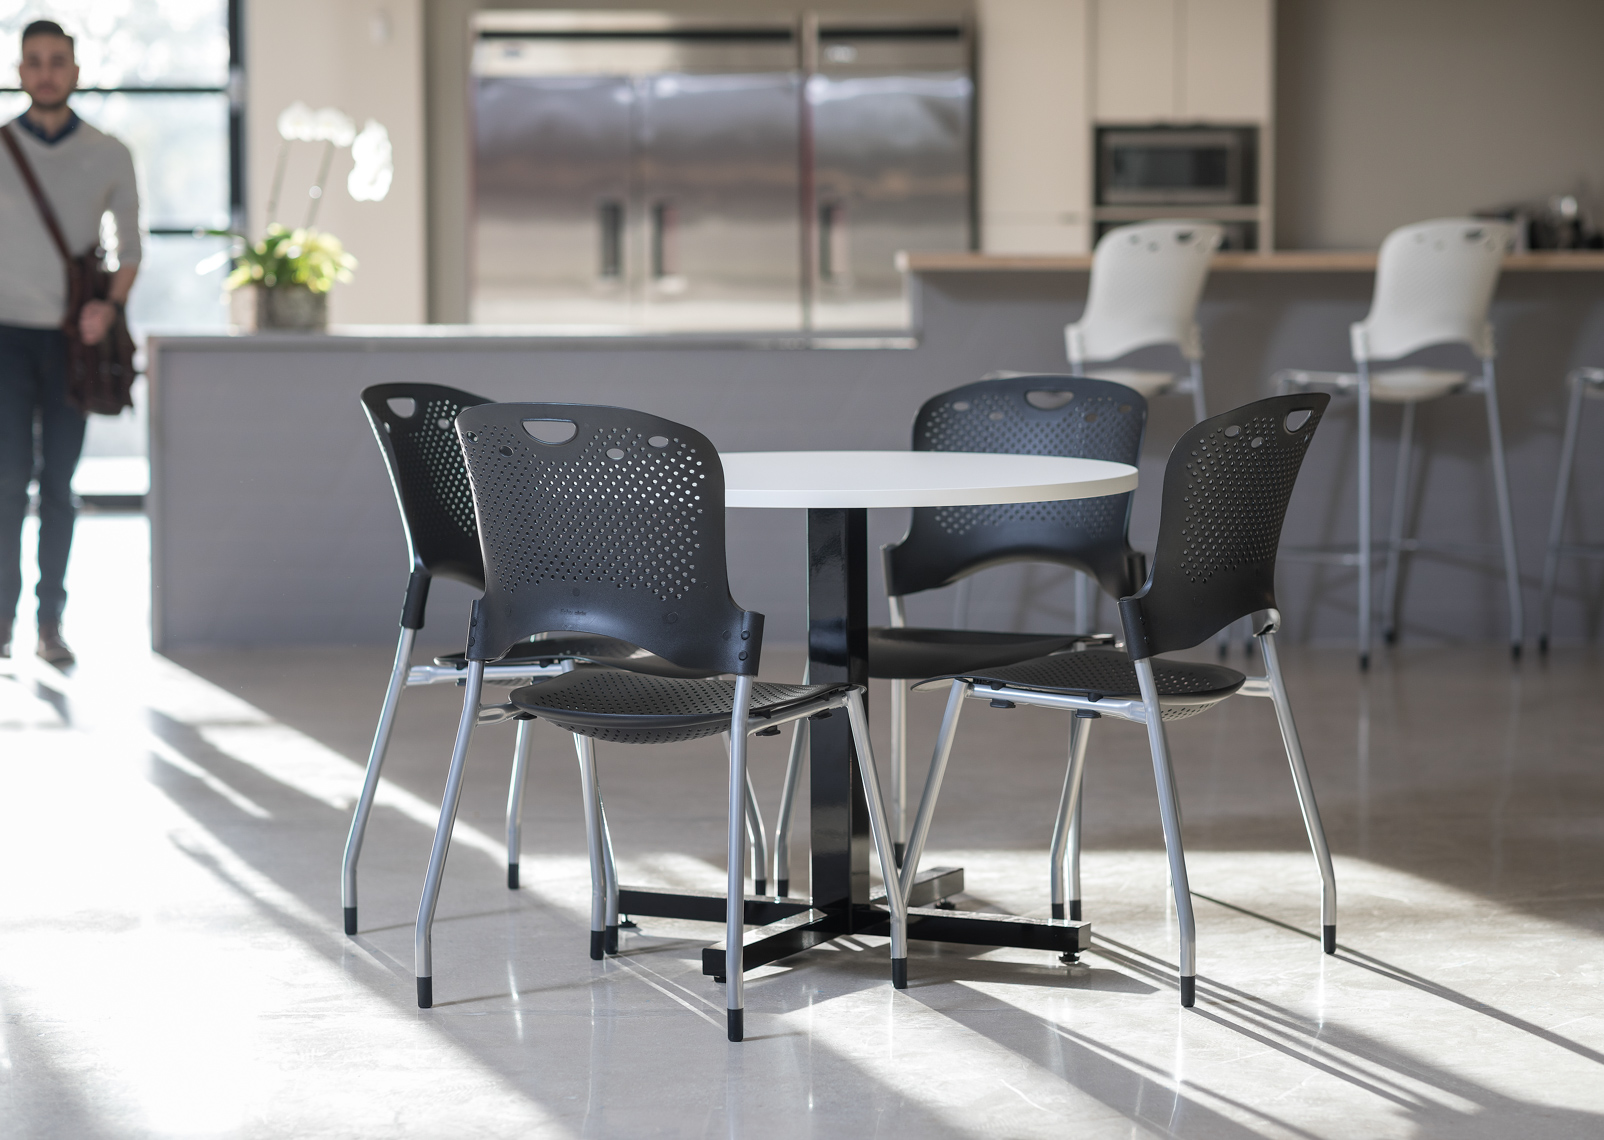 clear-design-office-breakroom-chairs-product-jason-risner-photography